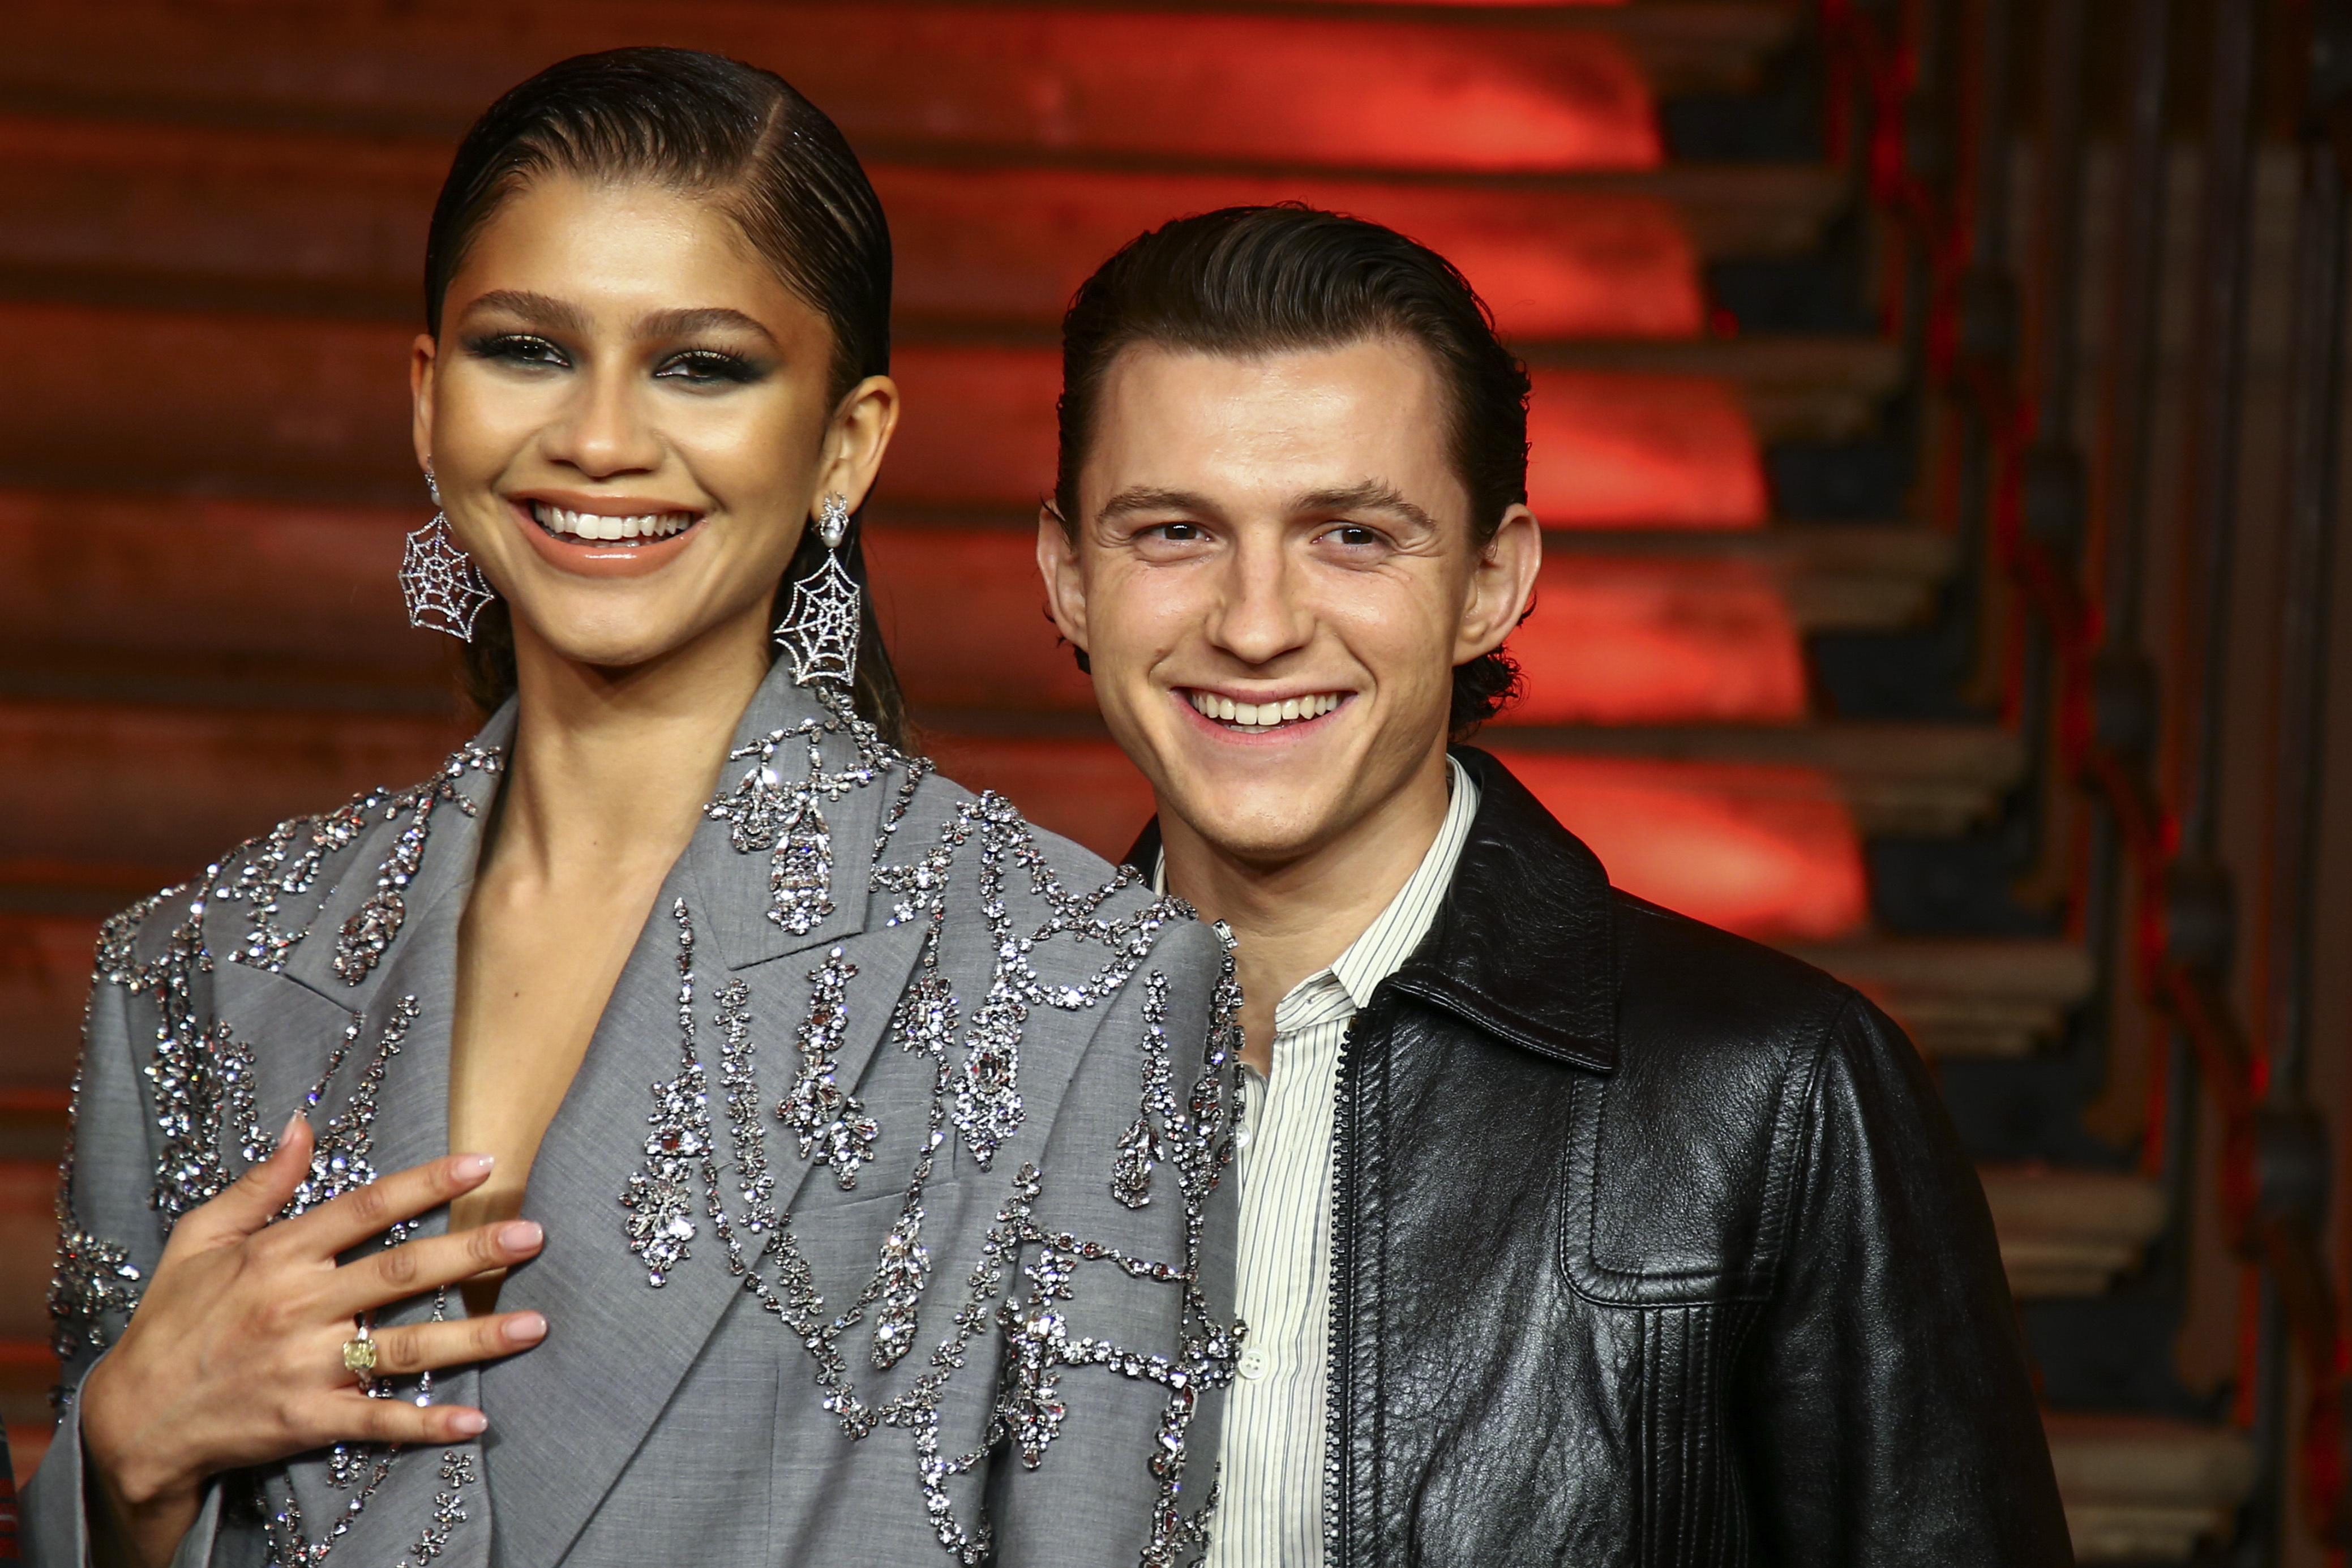 Are Tom Holland and Zendaya Still Together? Dating Update